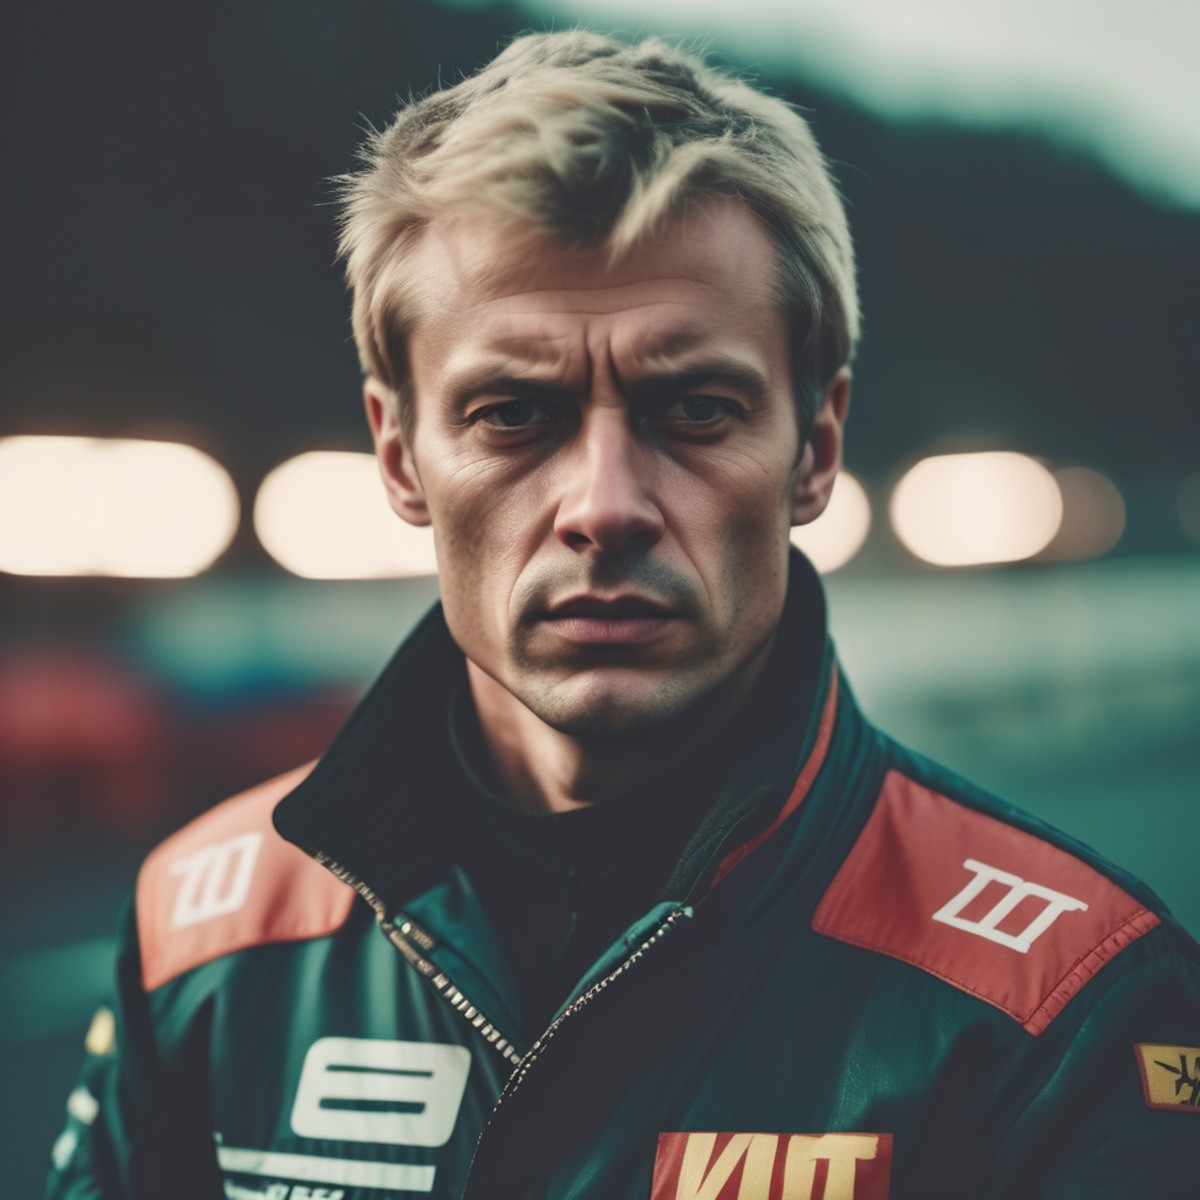 <lora:TestLUTs1:0.6>
blonde man with stern face, 80s style race driver coat, closeup portrait, dramatic action look LUT